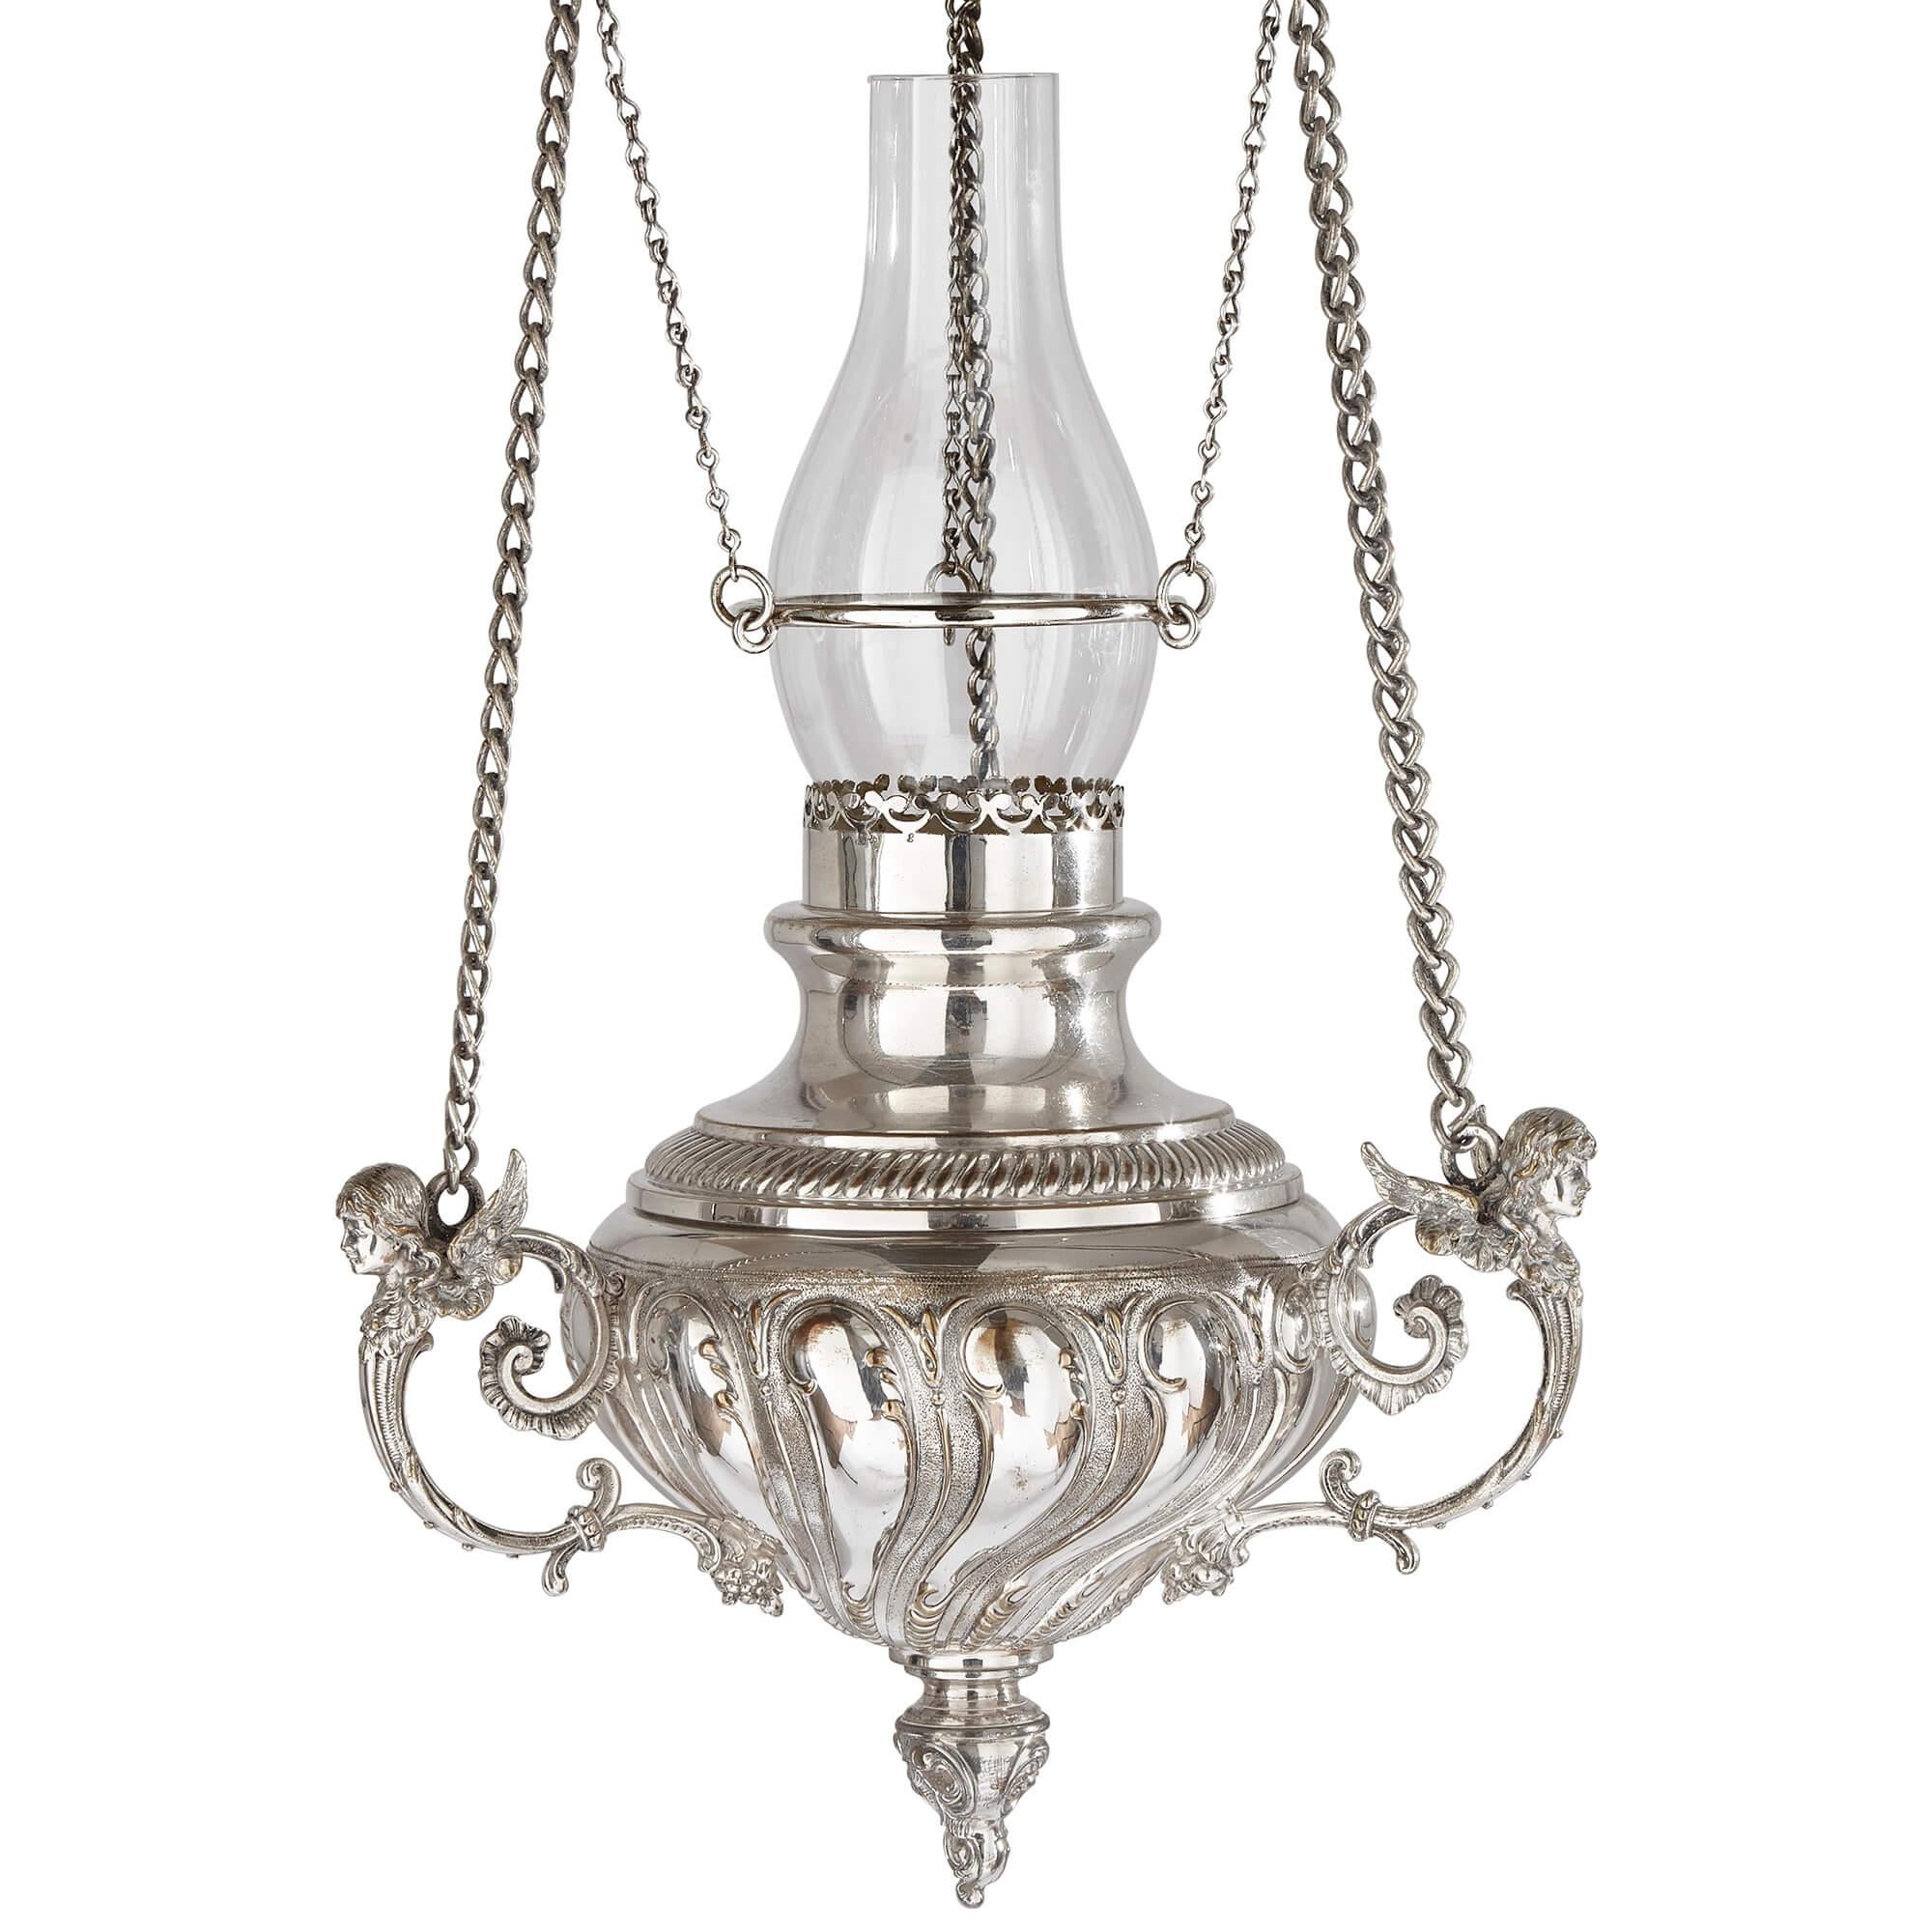 Large German silver-plated hanging lantern by WMF
German, c.1920
Height 90cm, diameter 24cm

Consisting of a round pointed gadrooned finial suspended by curb chains and surmounted by an open lighting fixture, this exceptional piece is a large,